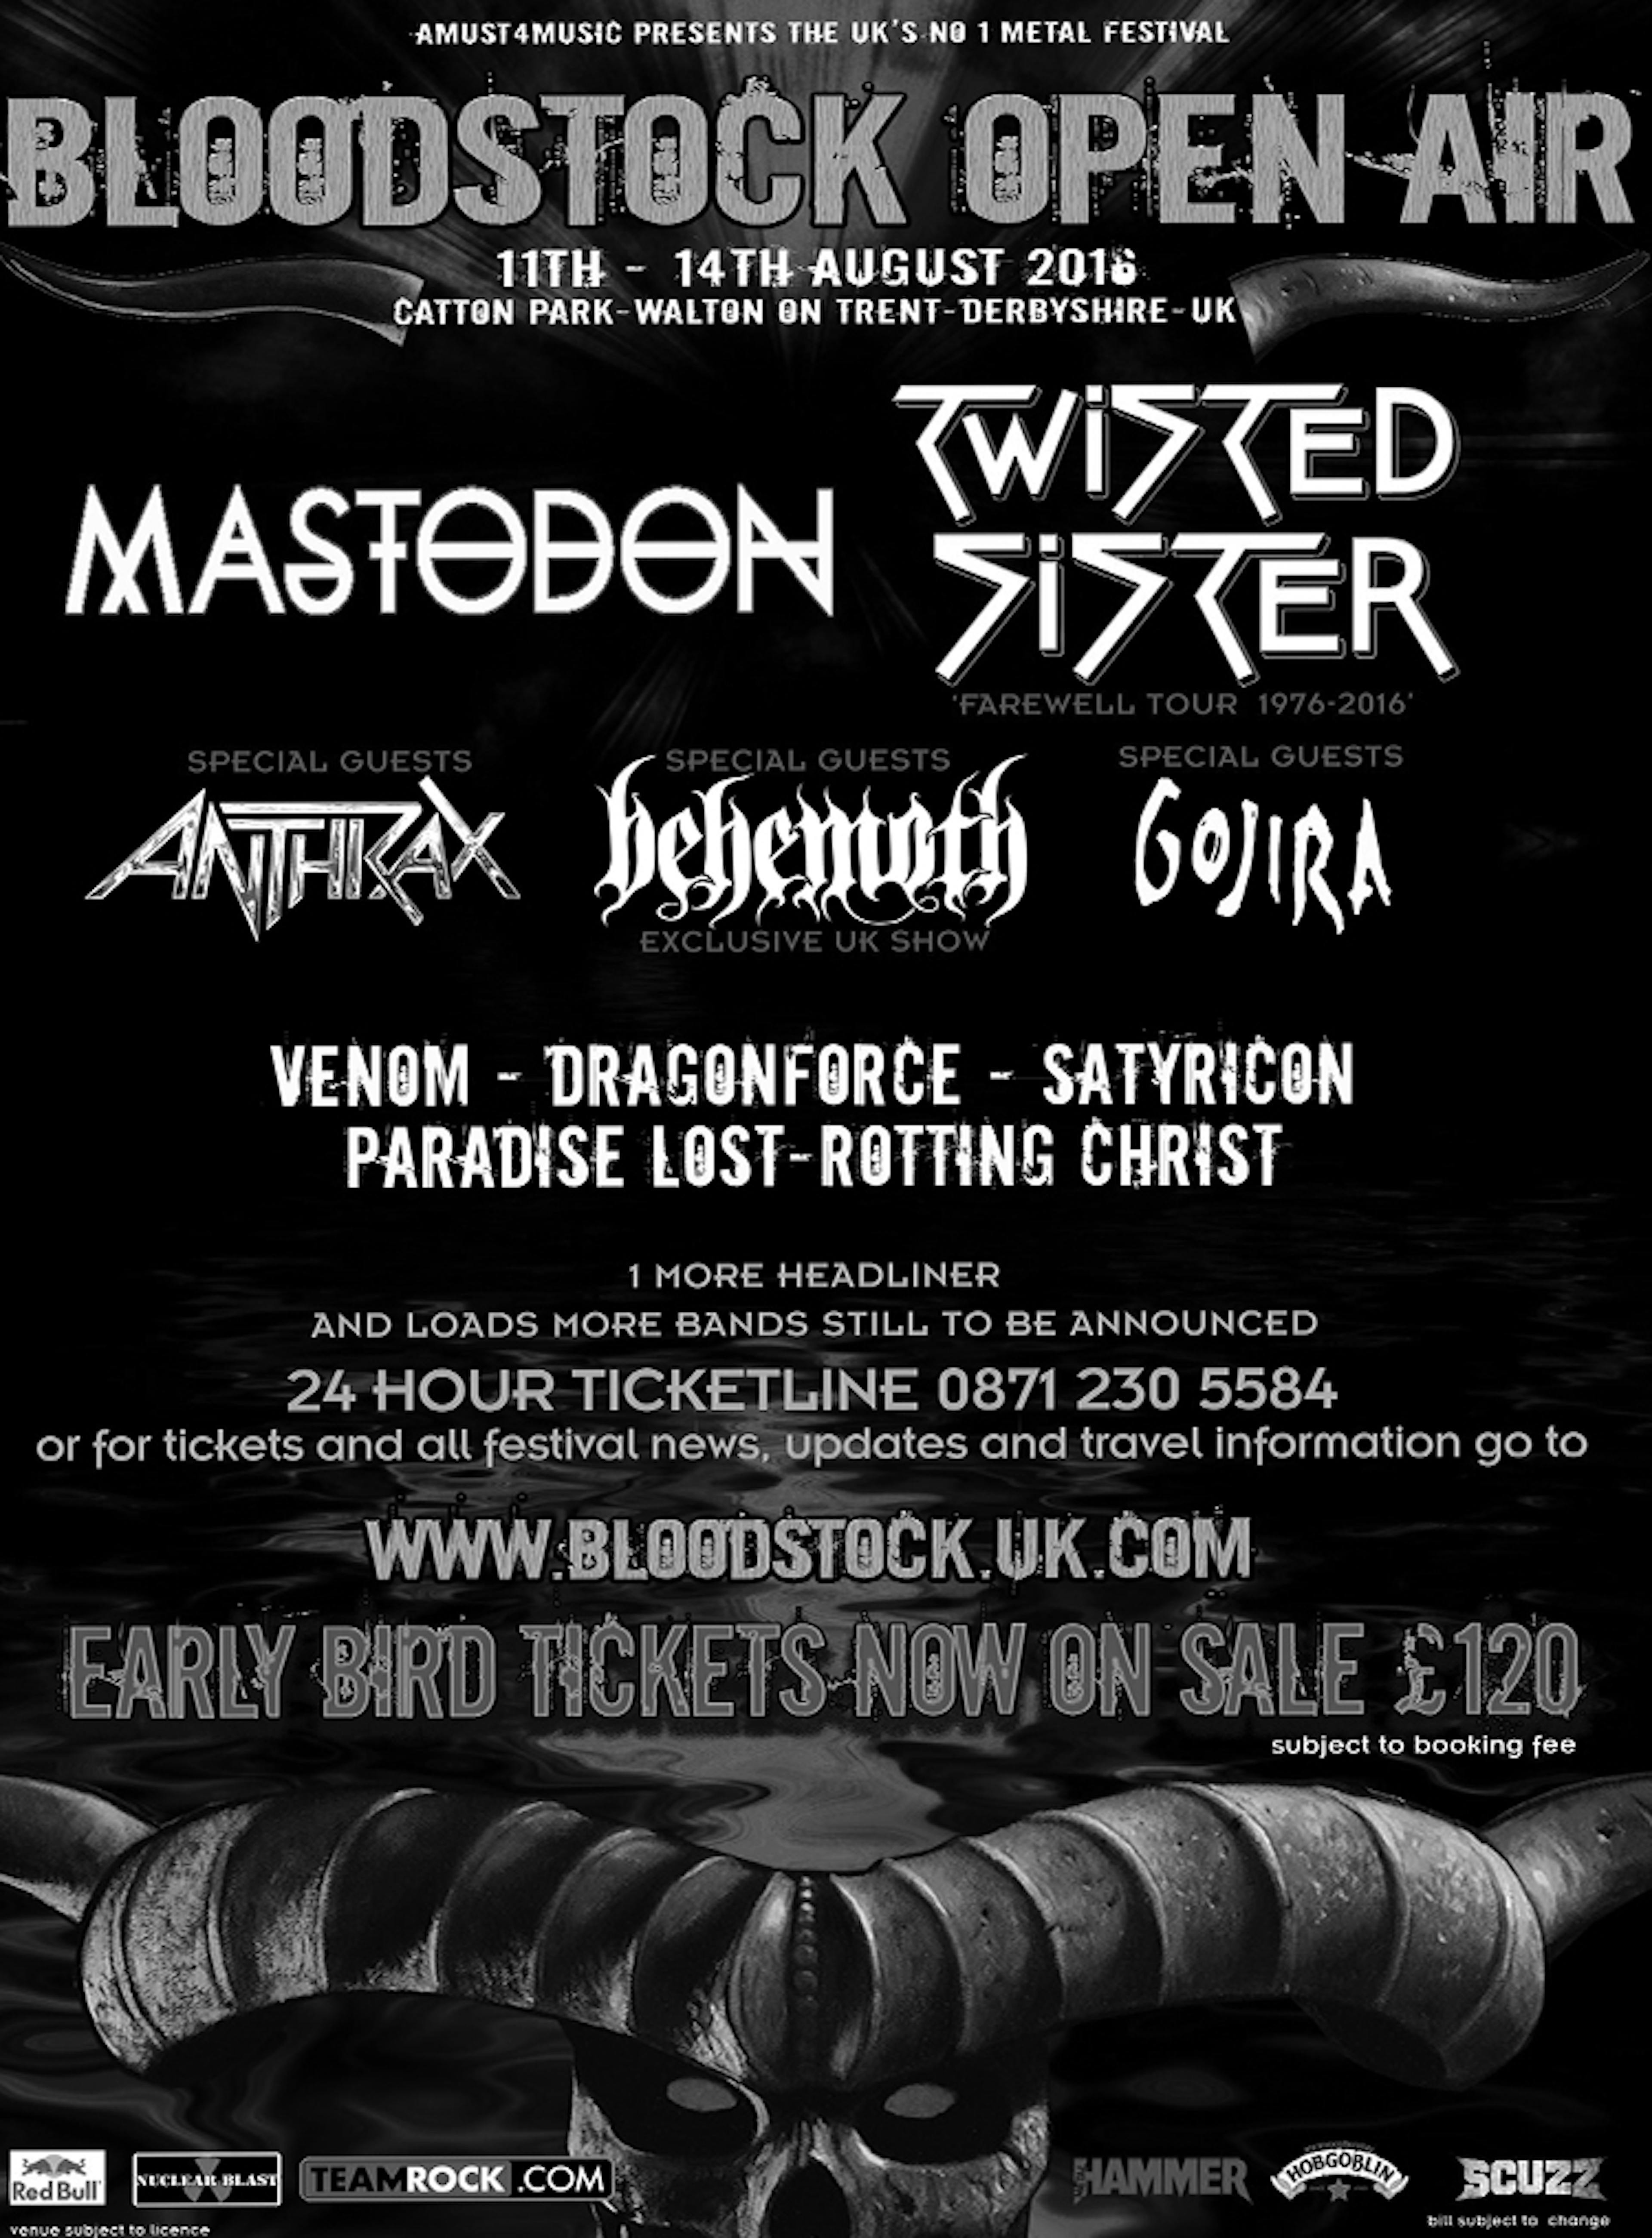 Anthrax Head Up Latest Bloodstock 2016 Announcement